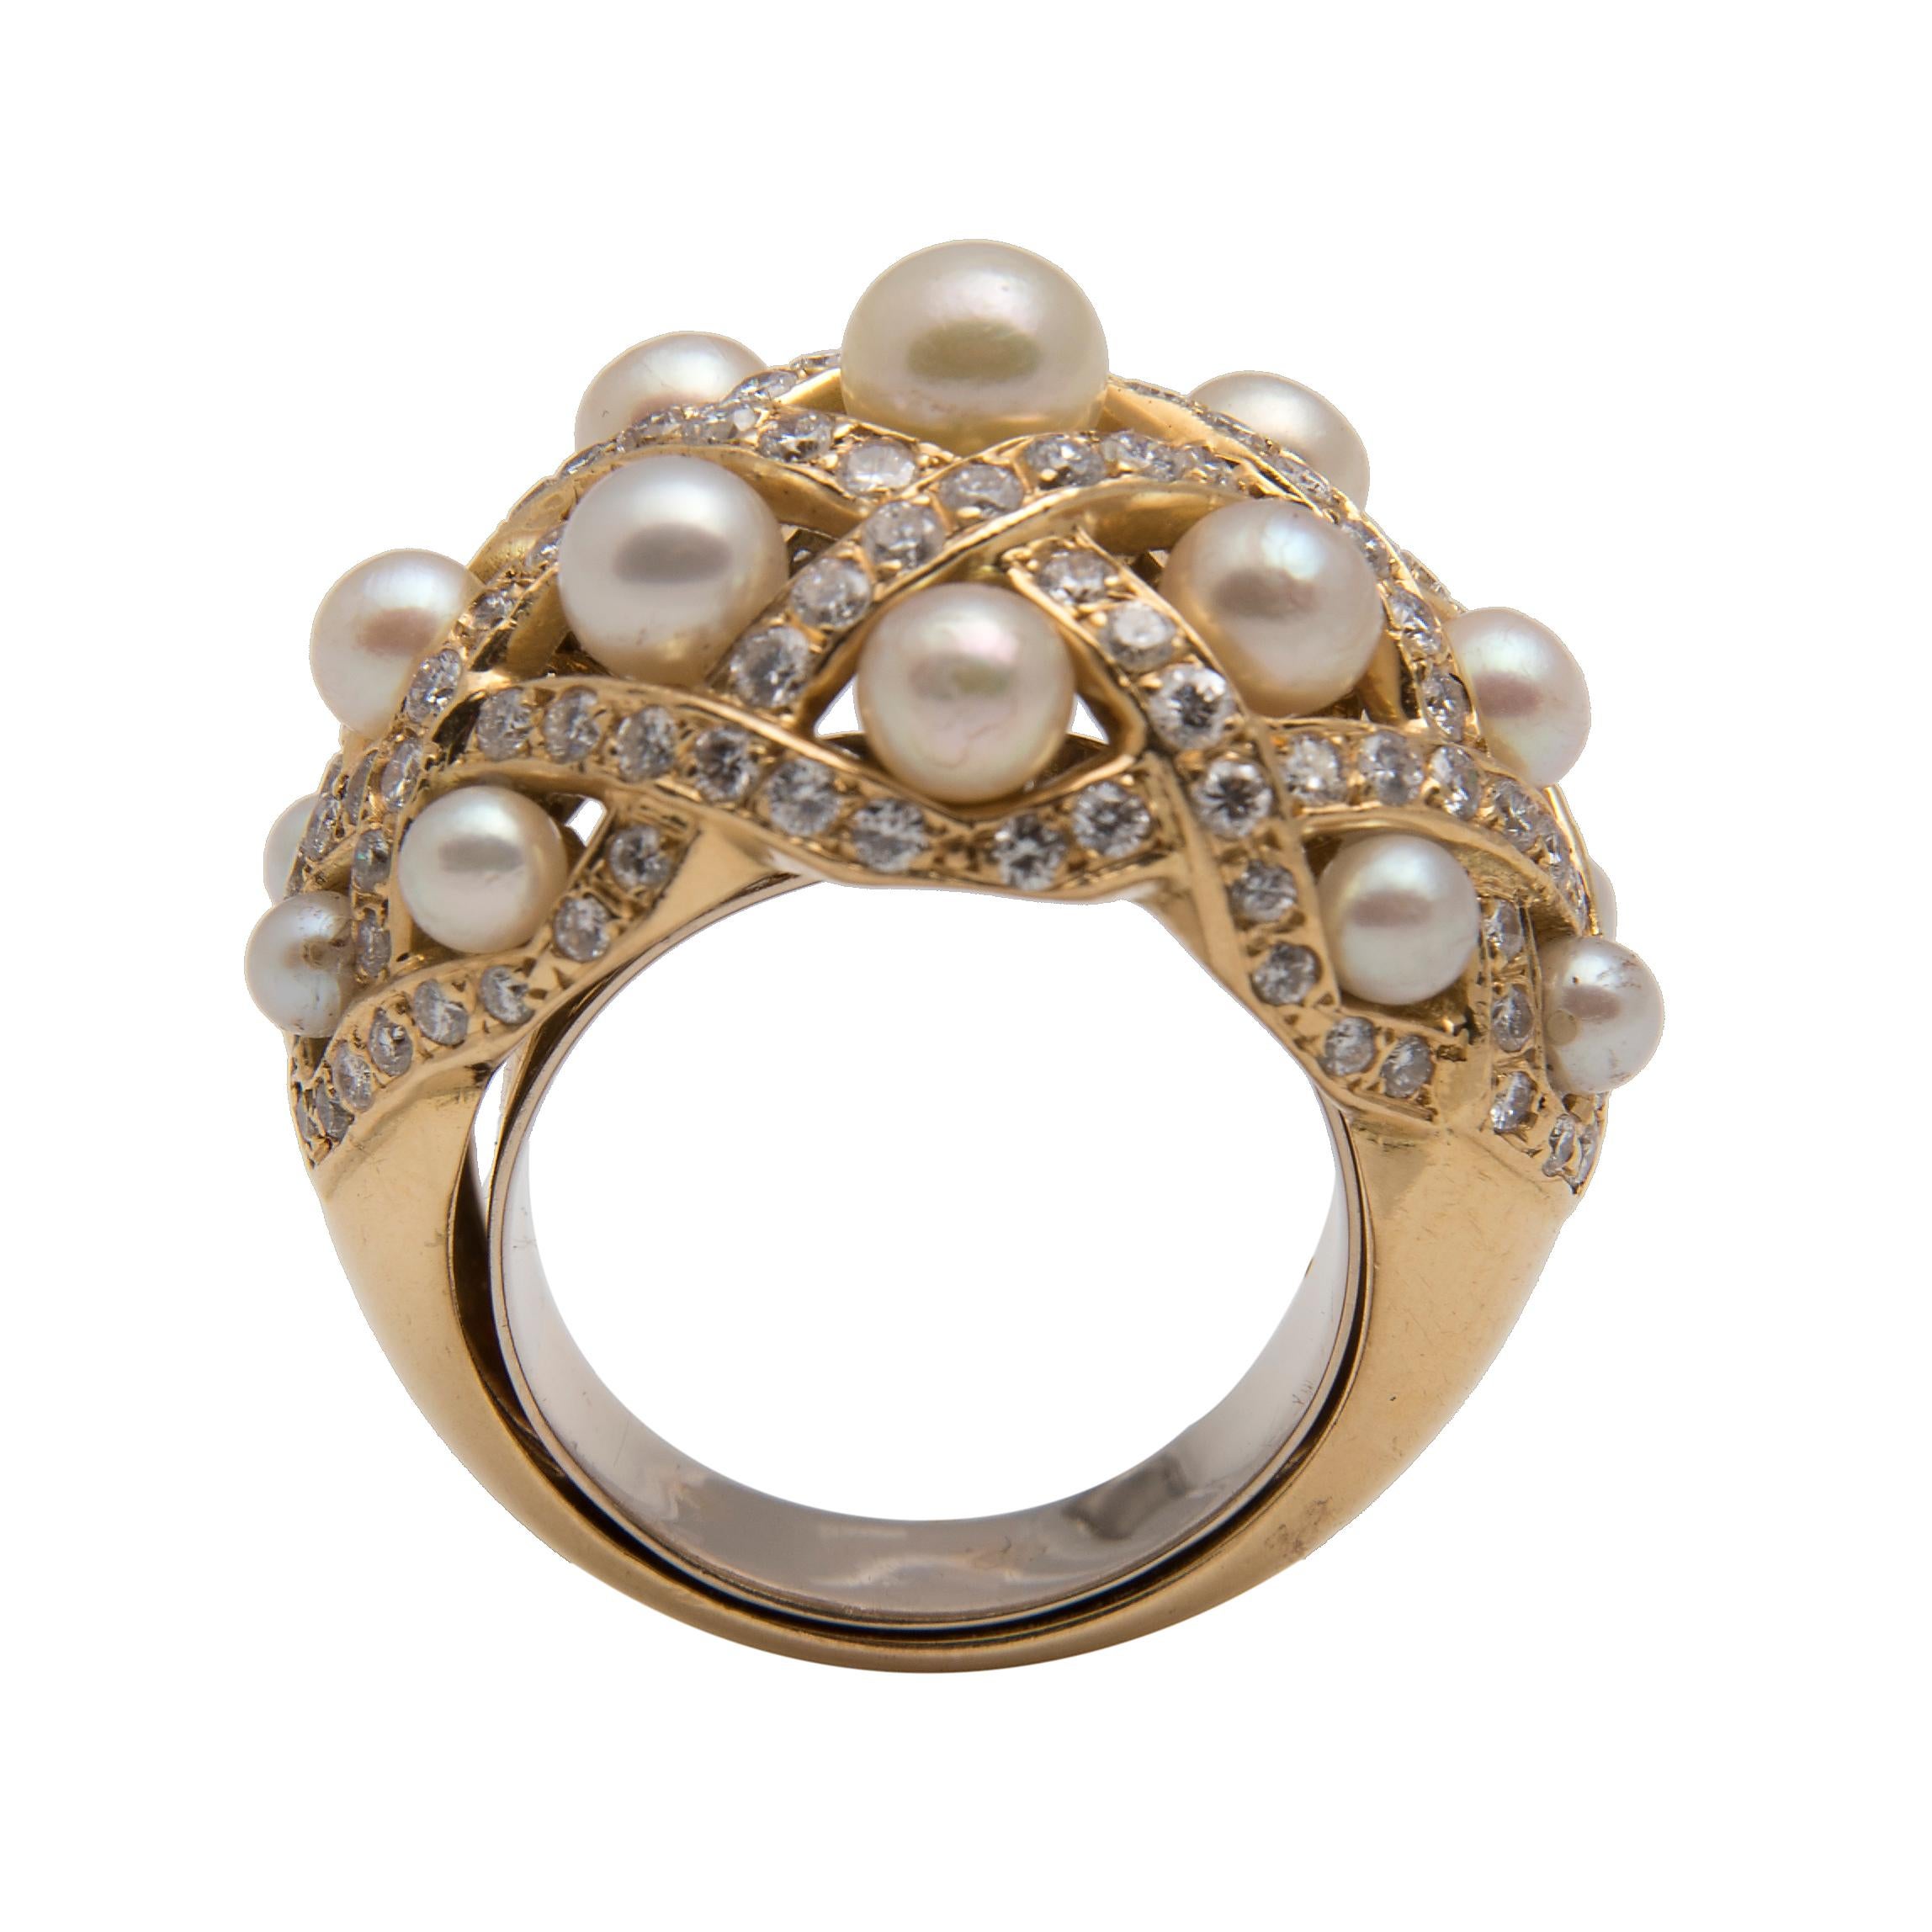 An impressive 18k gold 'bombé' cocktail ring with diamond-set interlaces decorated with 17 cultured pearls
Size EU: 53, US: 6 1/2
French hallmarks
France, 1980's
